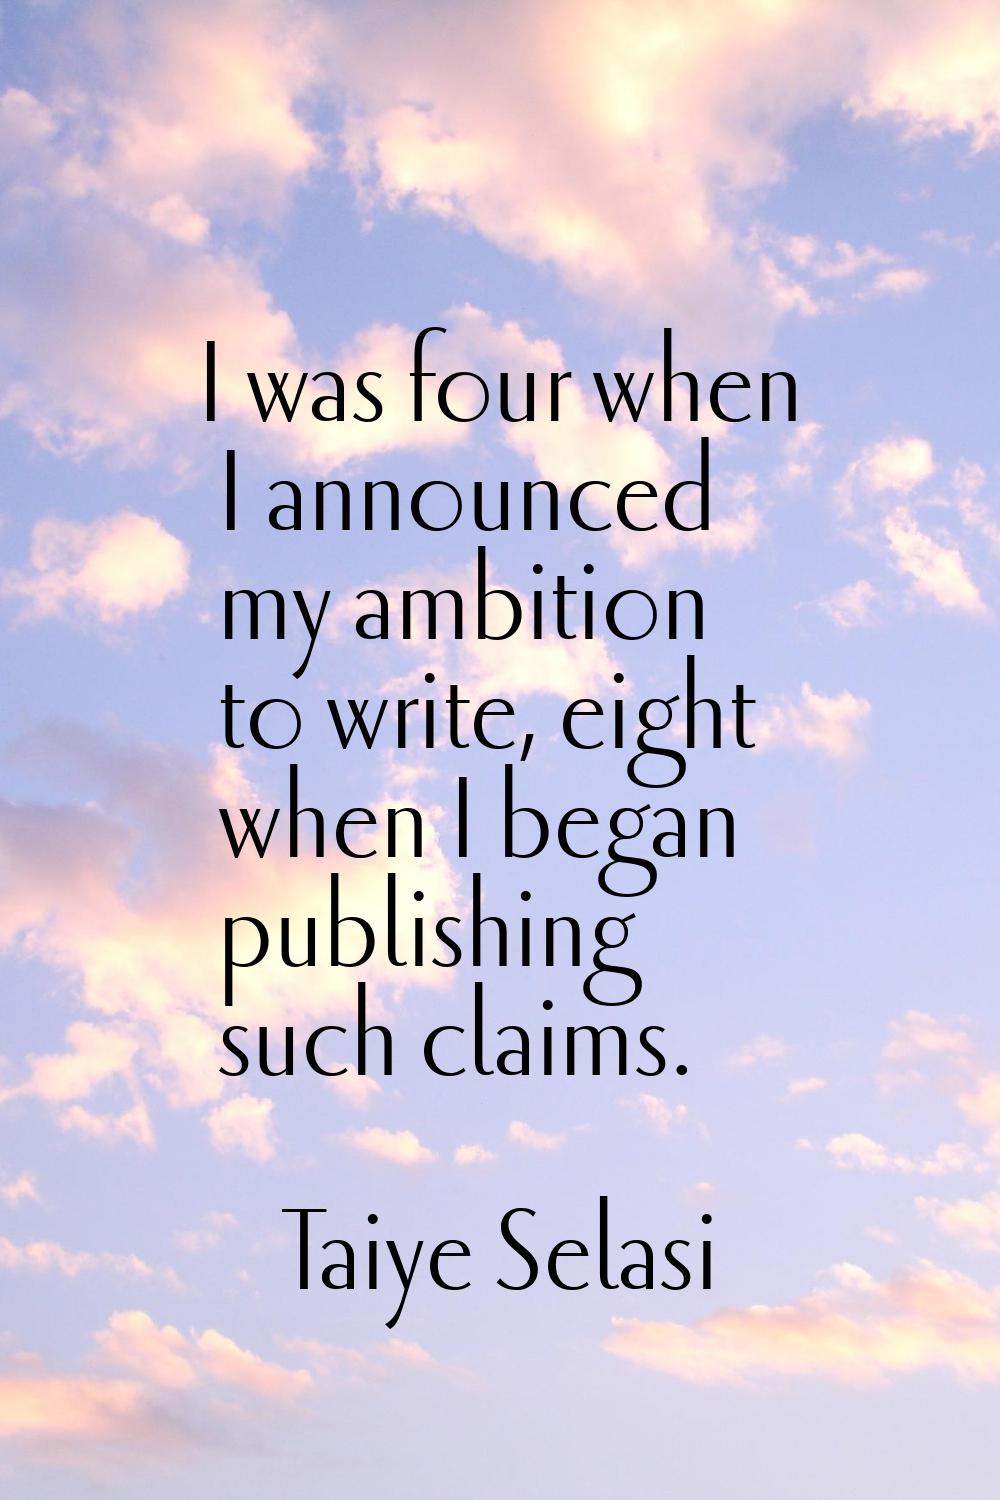 I was four when I announced my ambition to write, eight when I began publishing such claims.